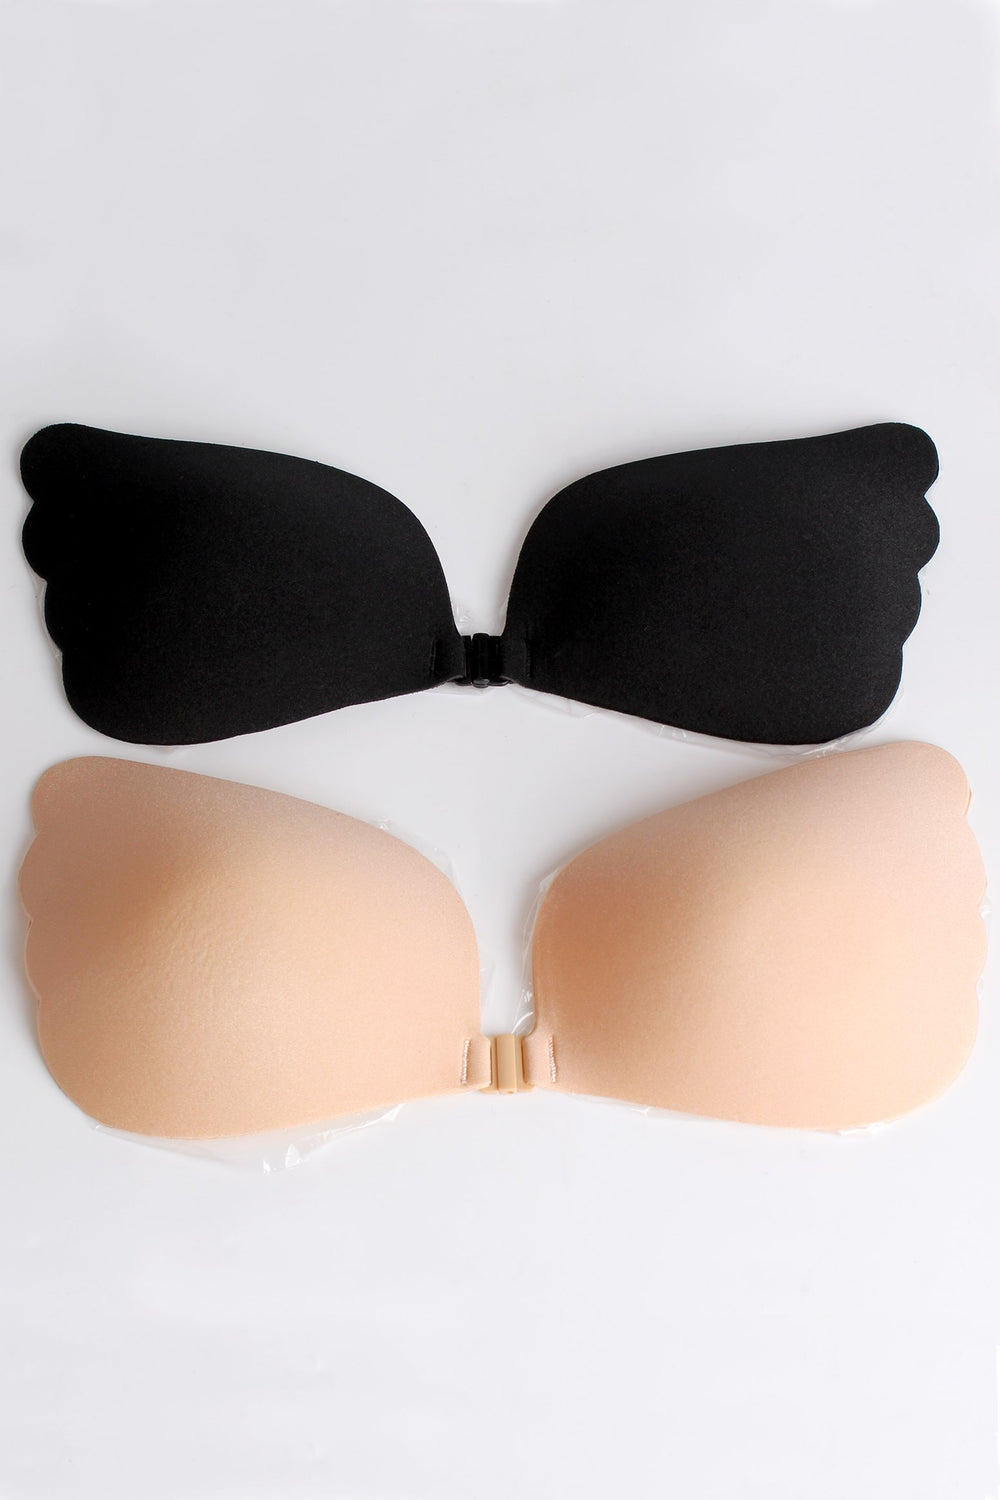 XB069 ND Hooked Up Invisible Bra - Nude